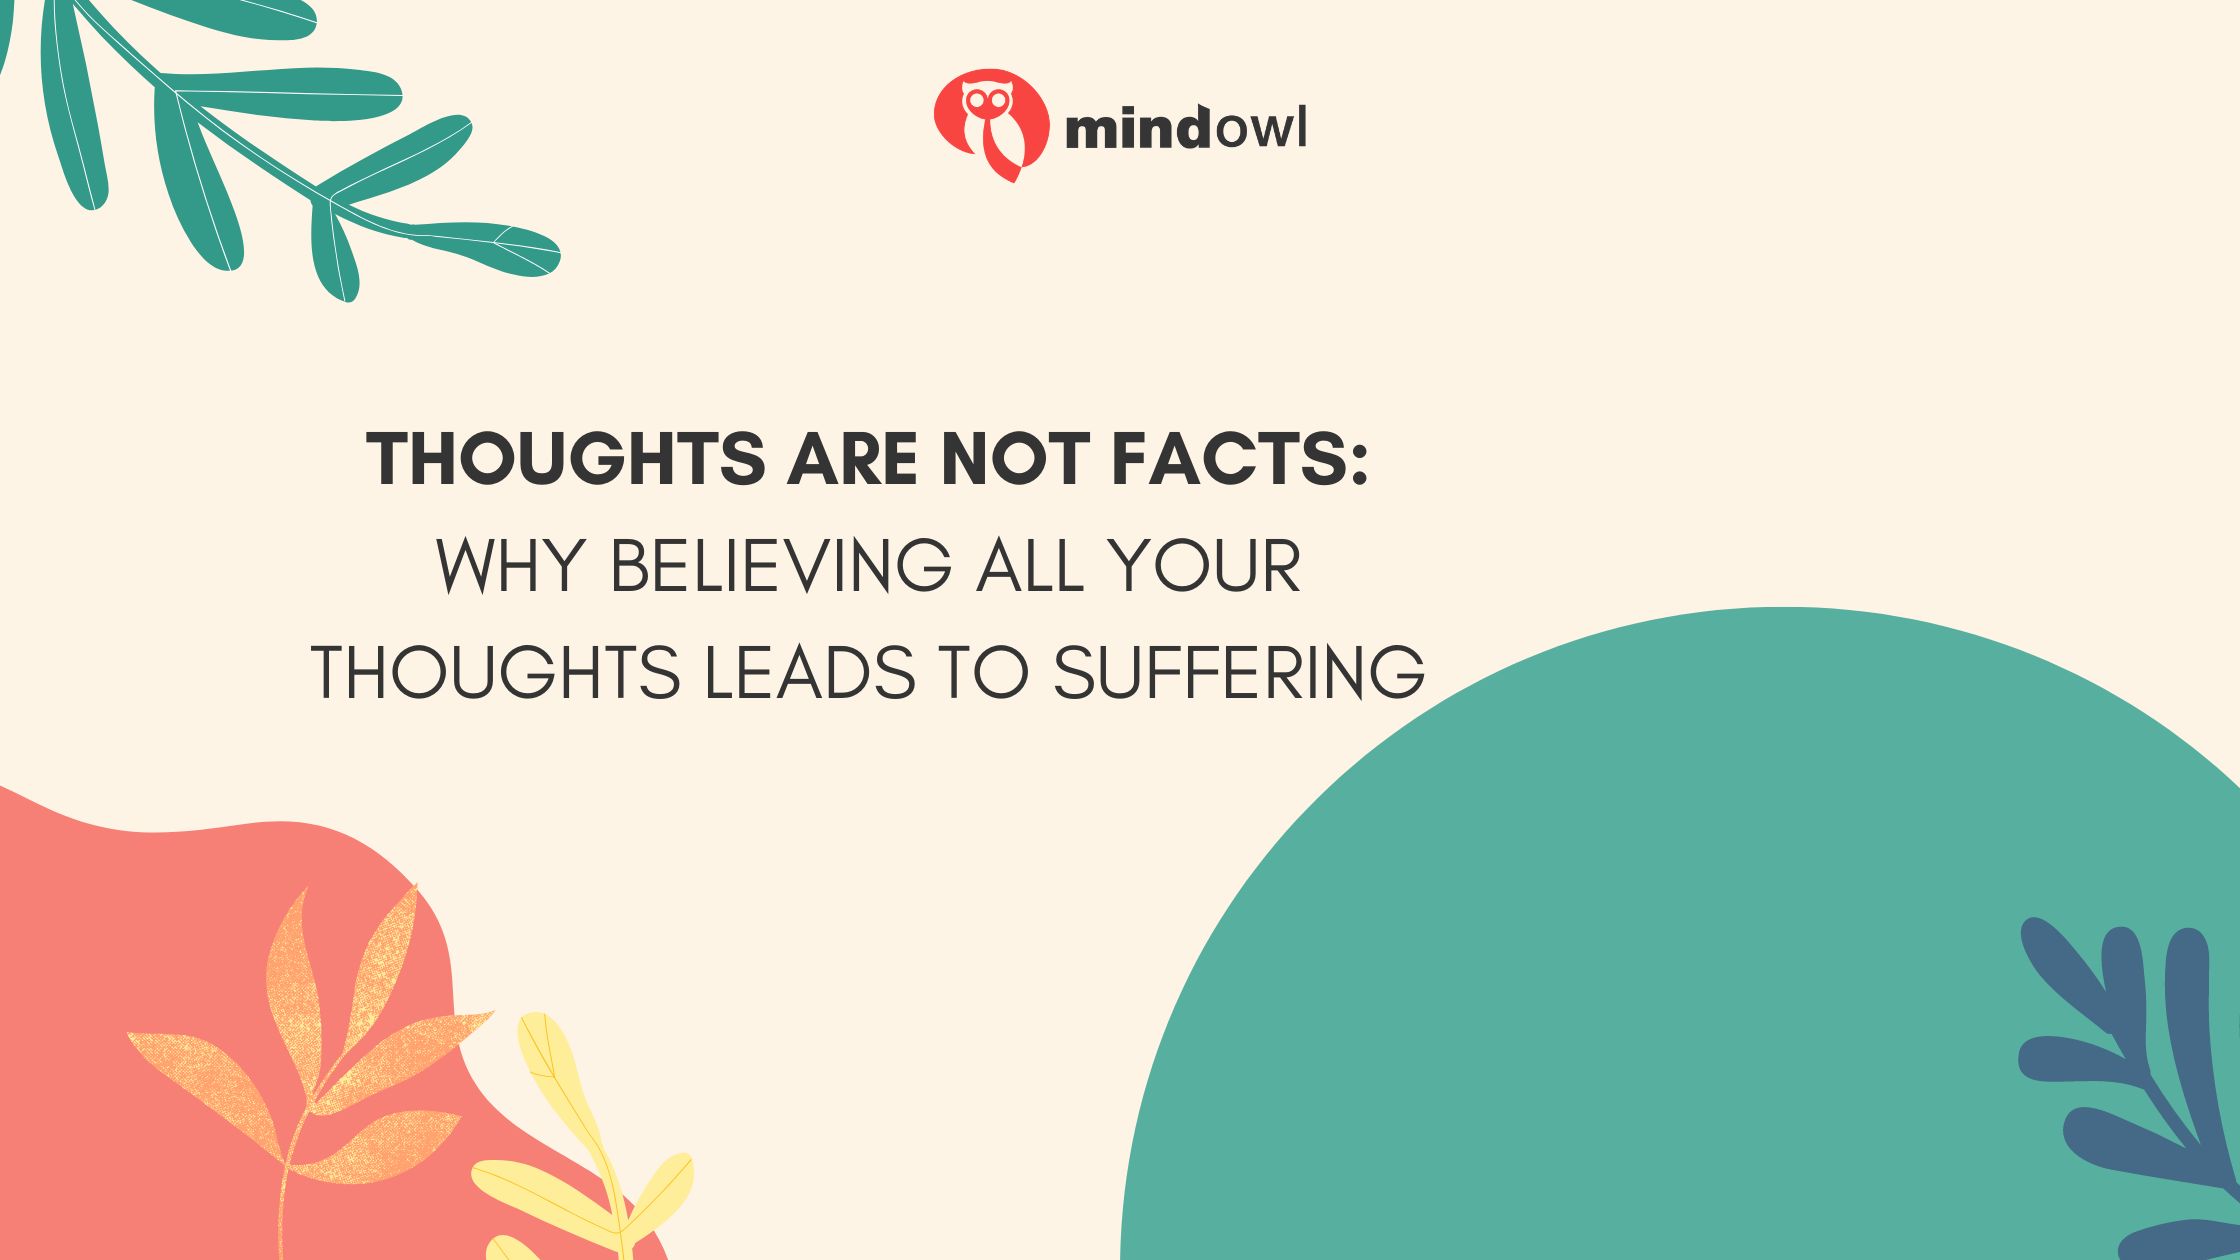 Thoughts Are Not Facts: Why Believing All Your Thoughts Leads to Suffering